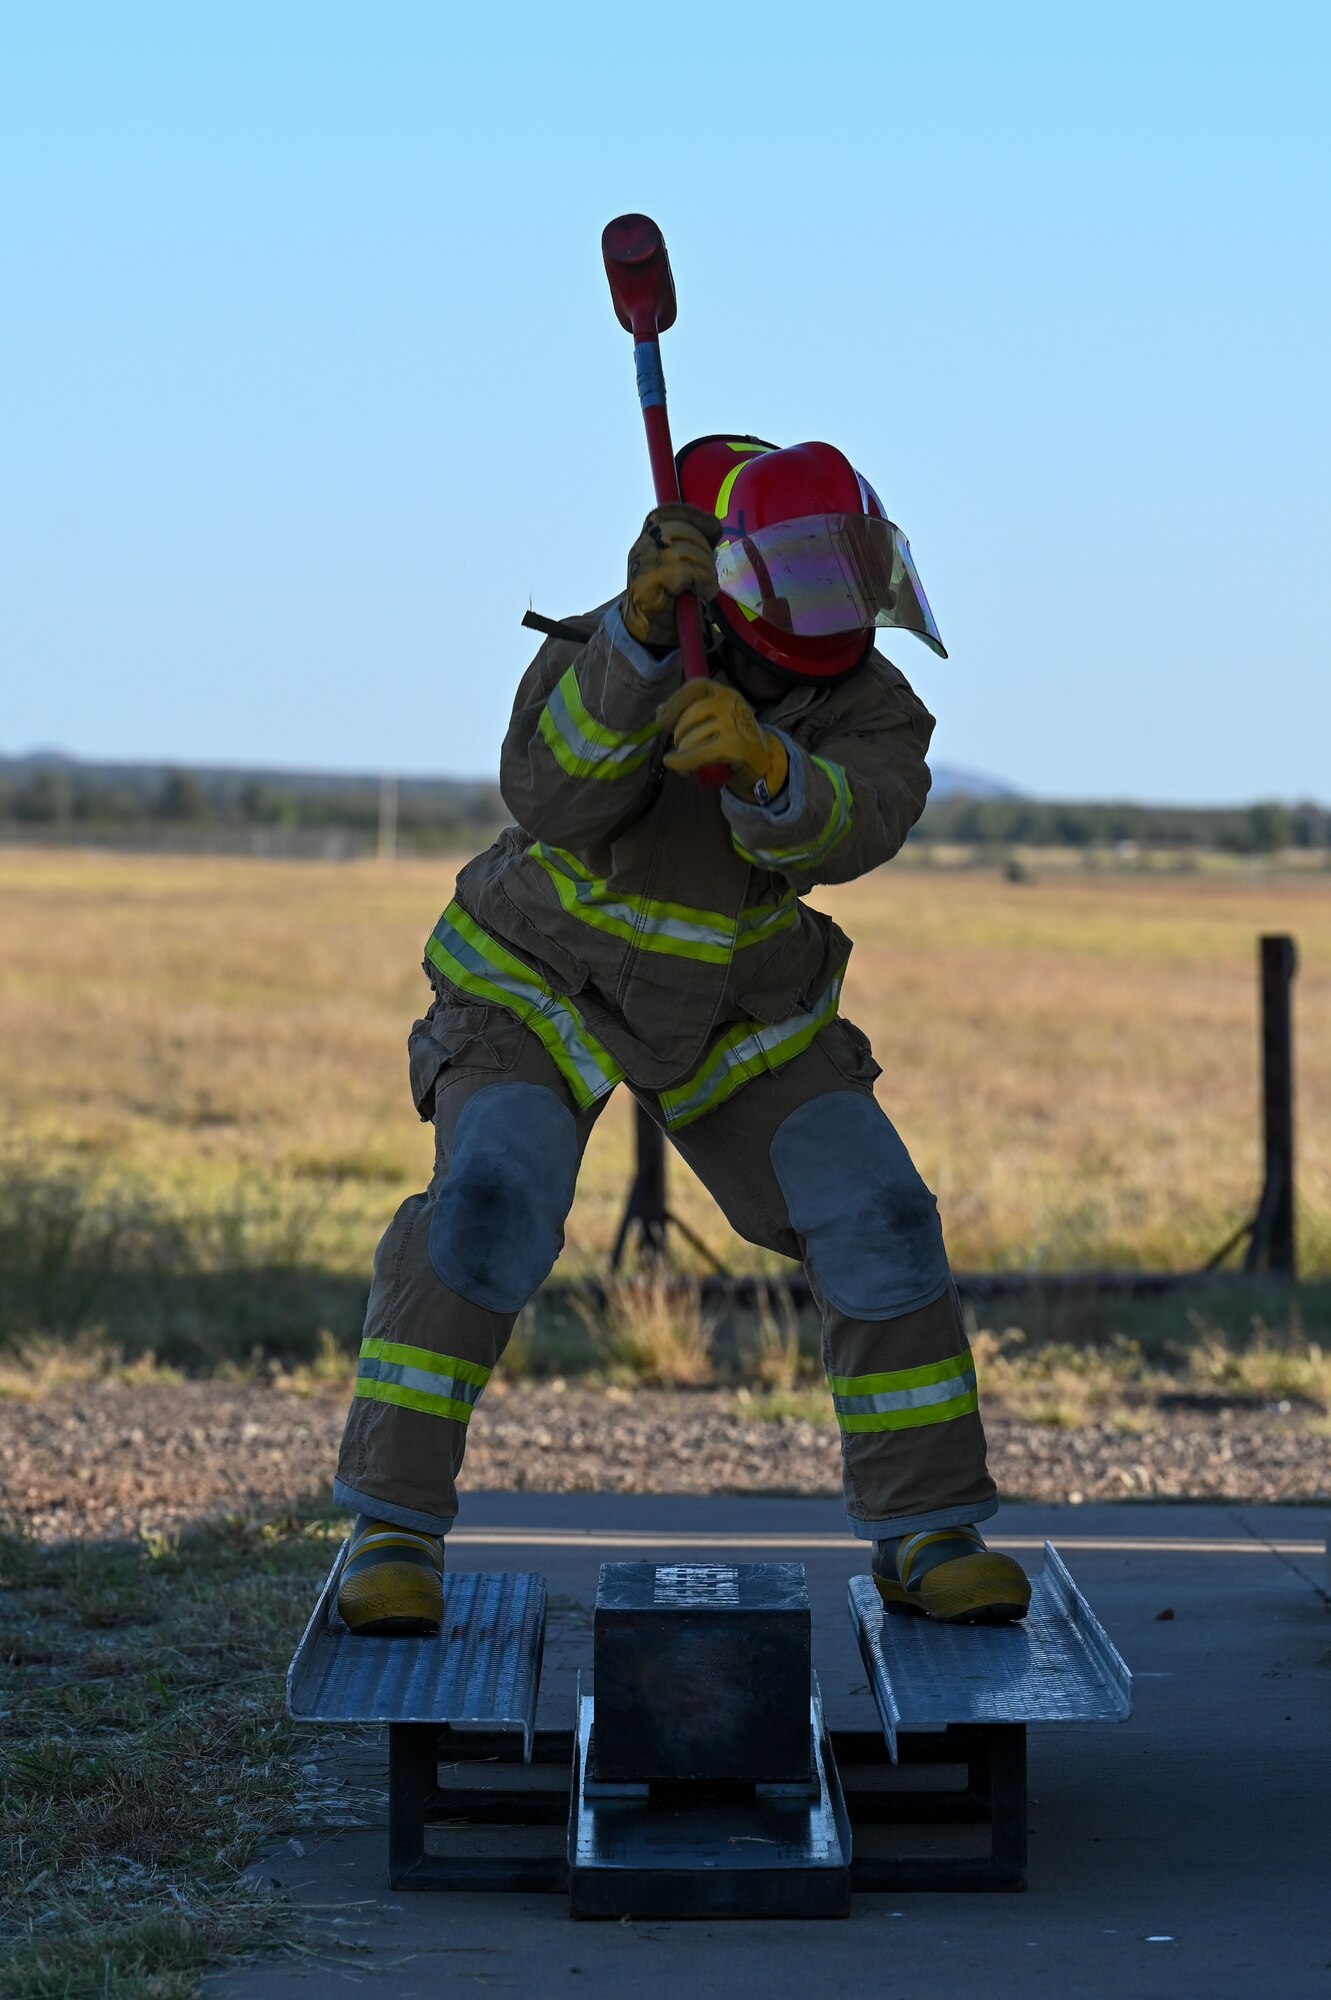 U.S. Air Force Lt. Col. Benjamin Davidson, 97th Training Squadron commander, participates in a challenge as part of Fire Prevention Week at Altus Air Force Base, Oklahoma, Oct. 13, 2022. The challenge included several obstacles to complete as quickly as possible to win the challenge against other commanders and first sergeants. (U.S. Air Force photo by Senior Airman Kayla Christenson)